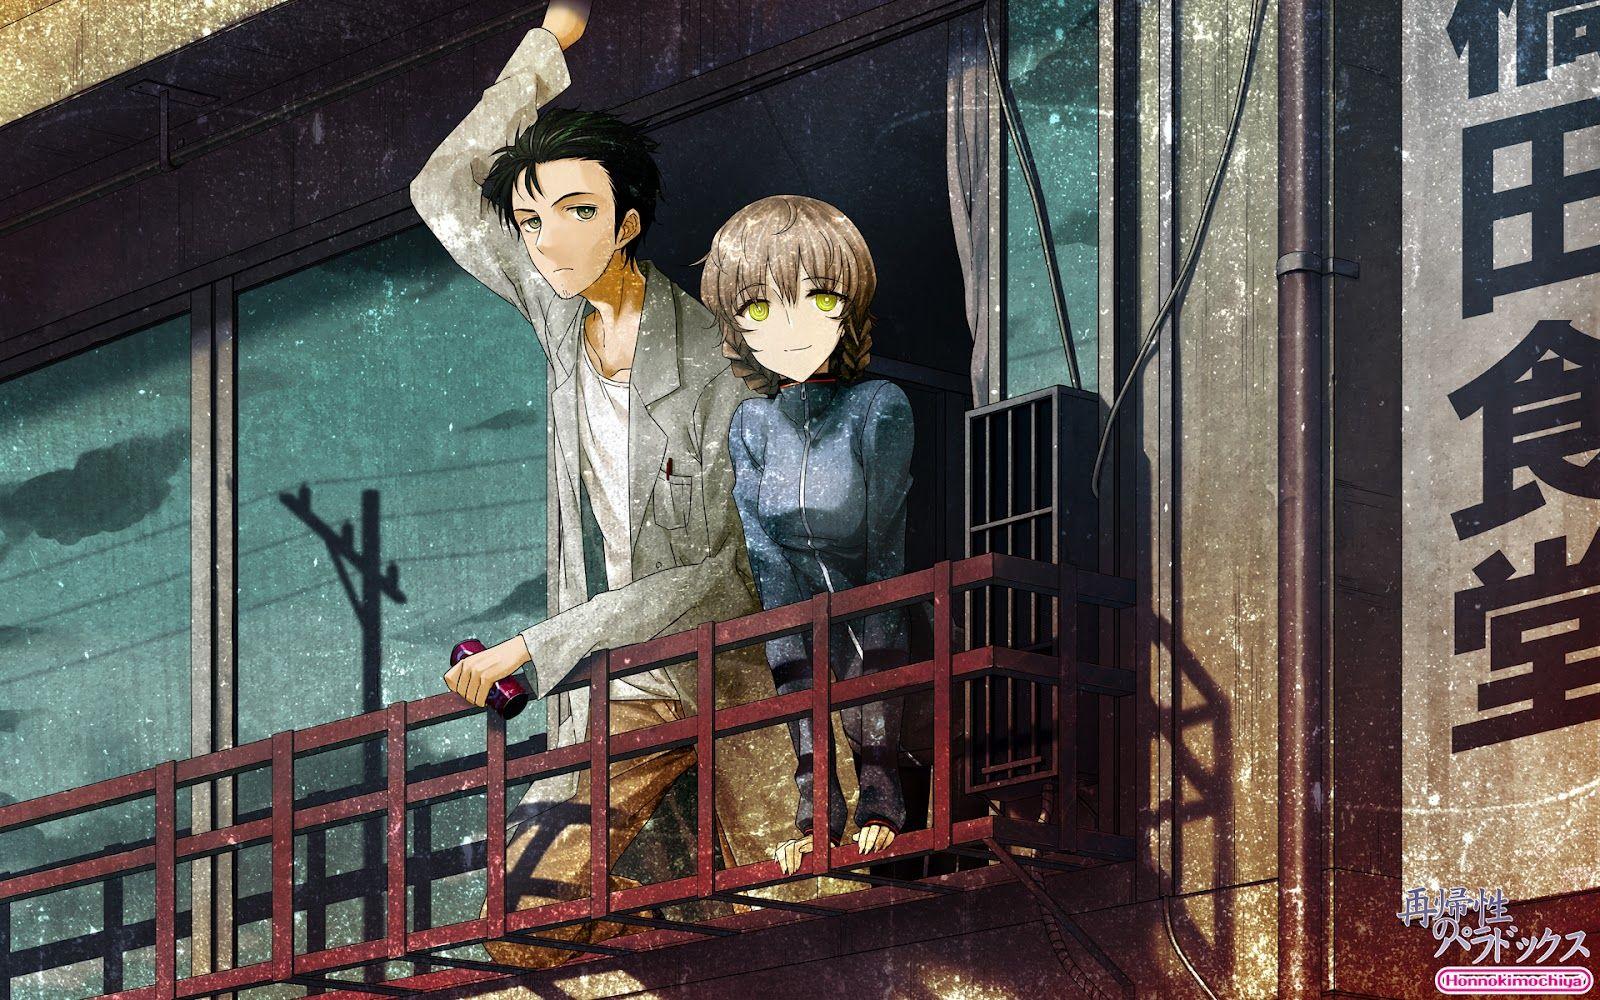 Steins;Gate Wallpaper, Details and Specifications